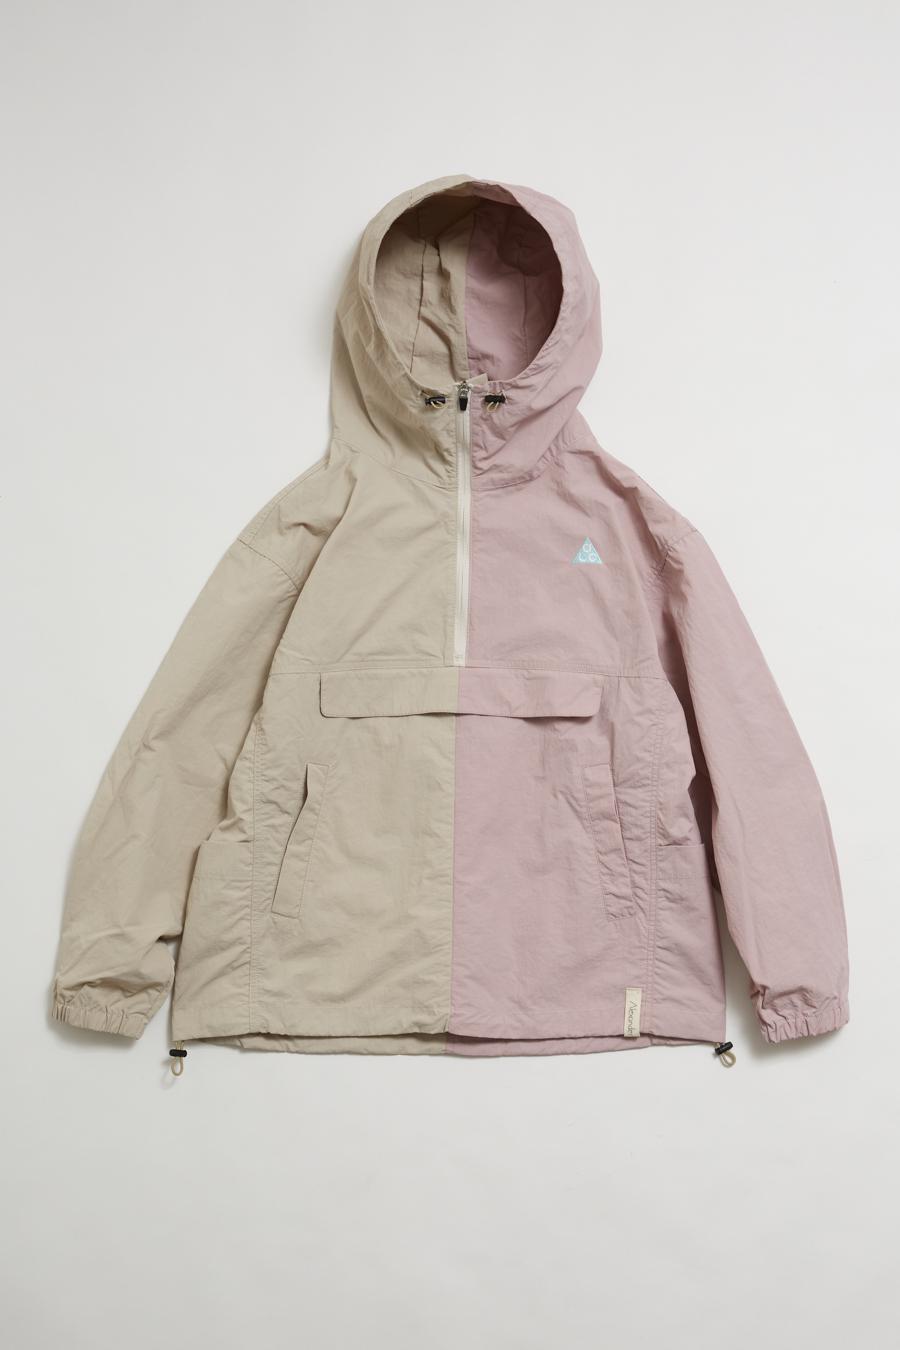 Alexande Lee Chang 5050 ANORAK PINK - boys in the band